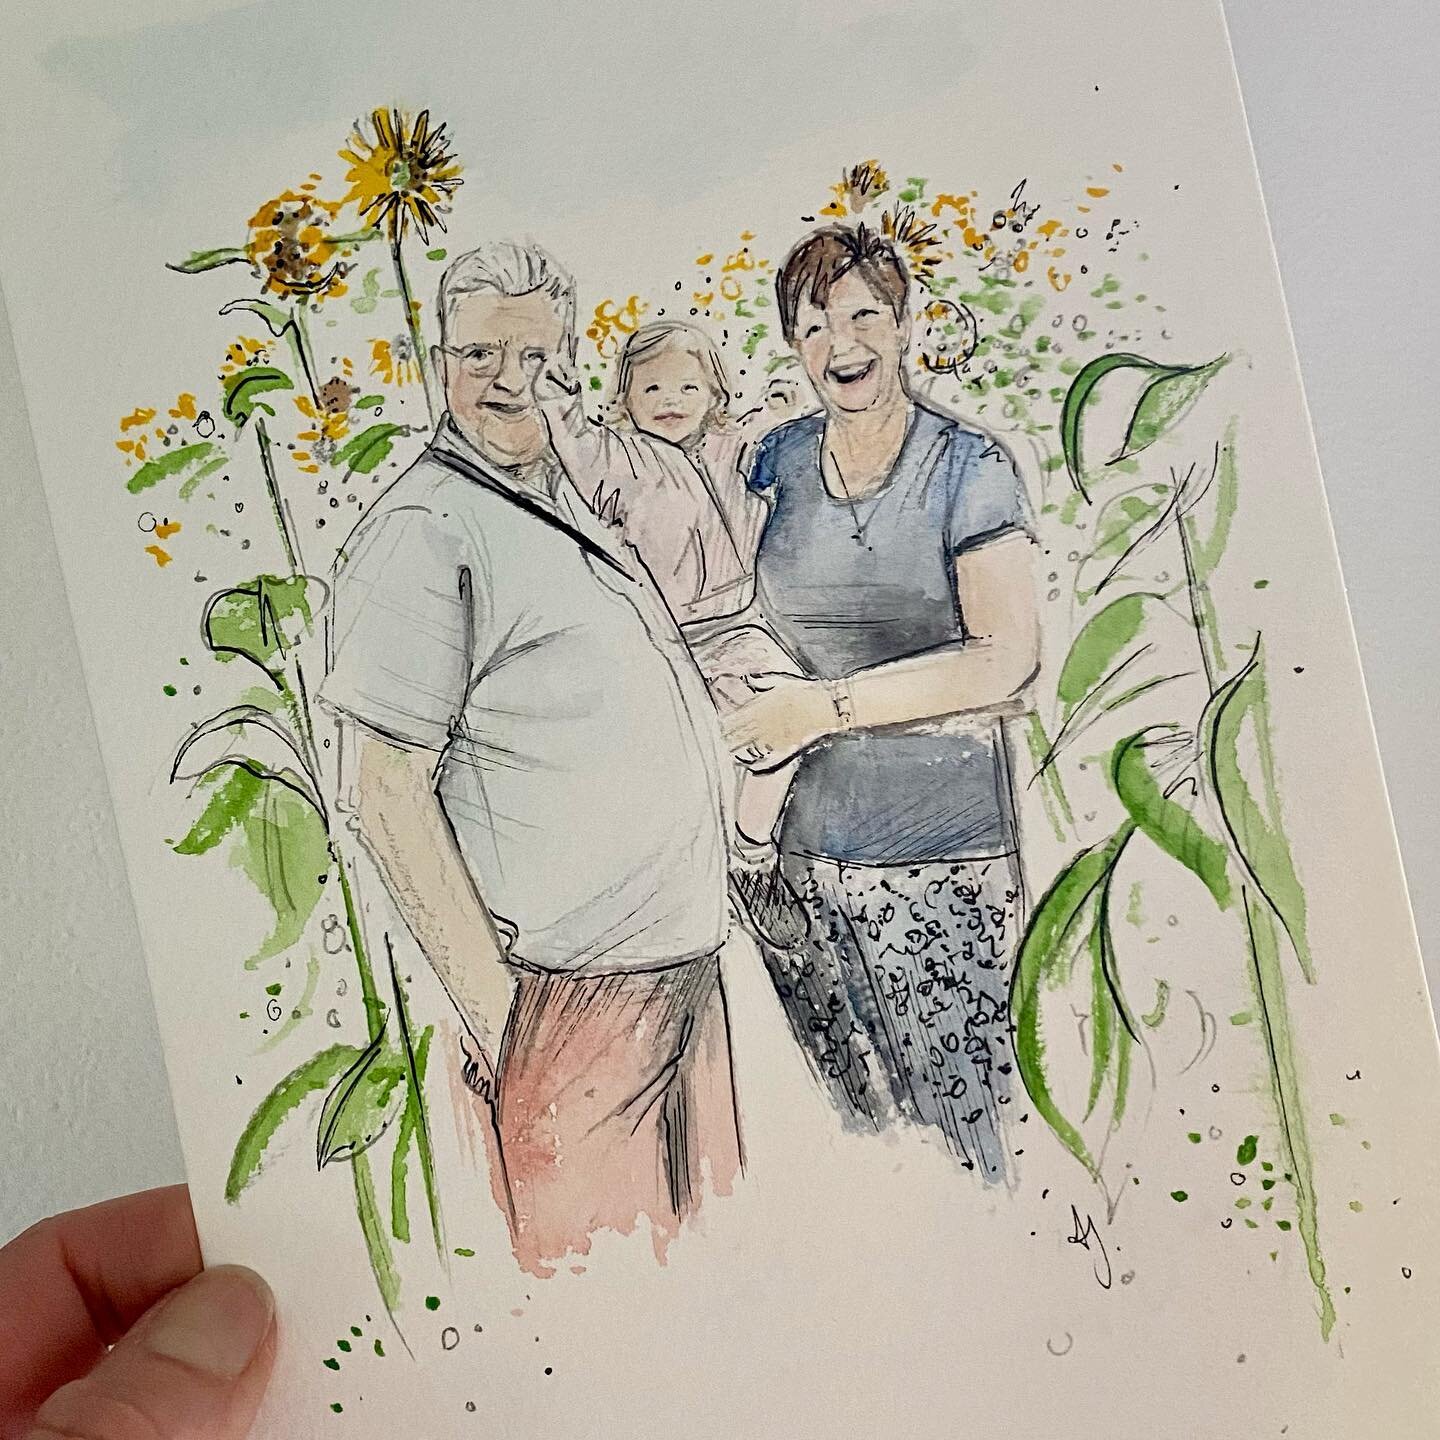 A little bit of sunshine ☀️
Just loved this idea for a Birthday gift of the happiest moment in the sunflower fields! 
So glad it was loved @kateemuz23 thank you so much ❤️ 
*
*
*
*
*
#illustration #illustrator #drawing #sketch #portrait #familyportra